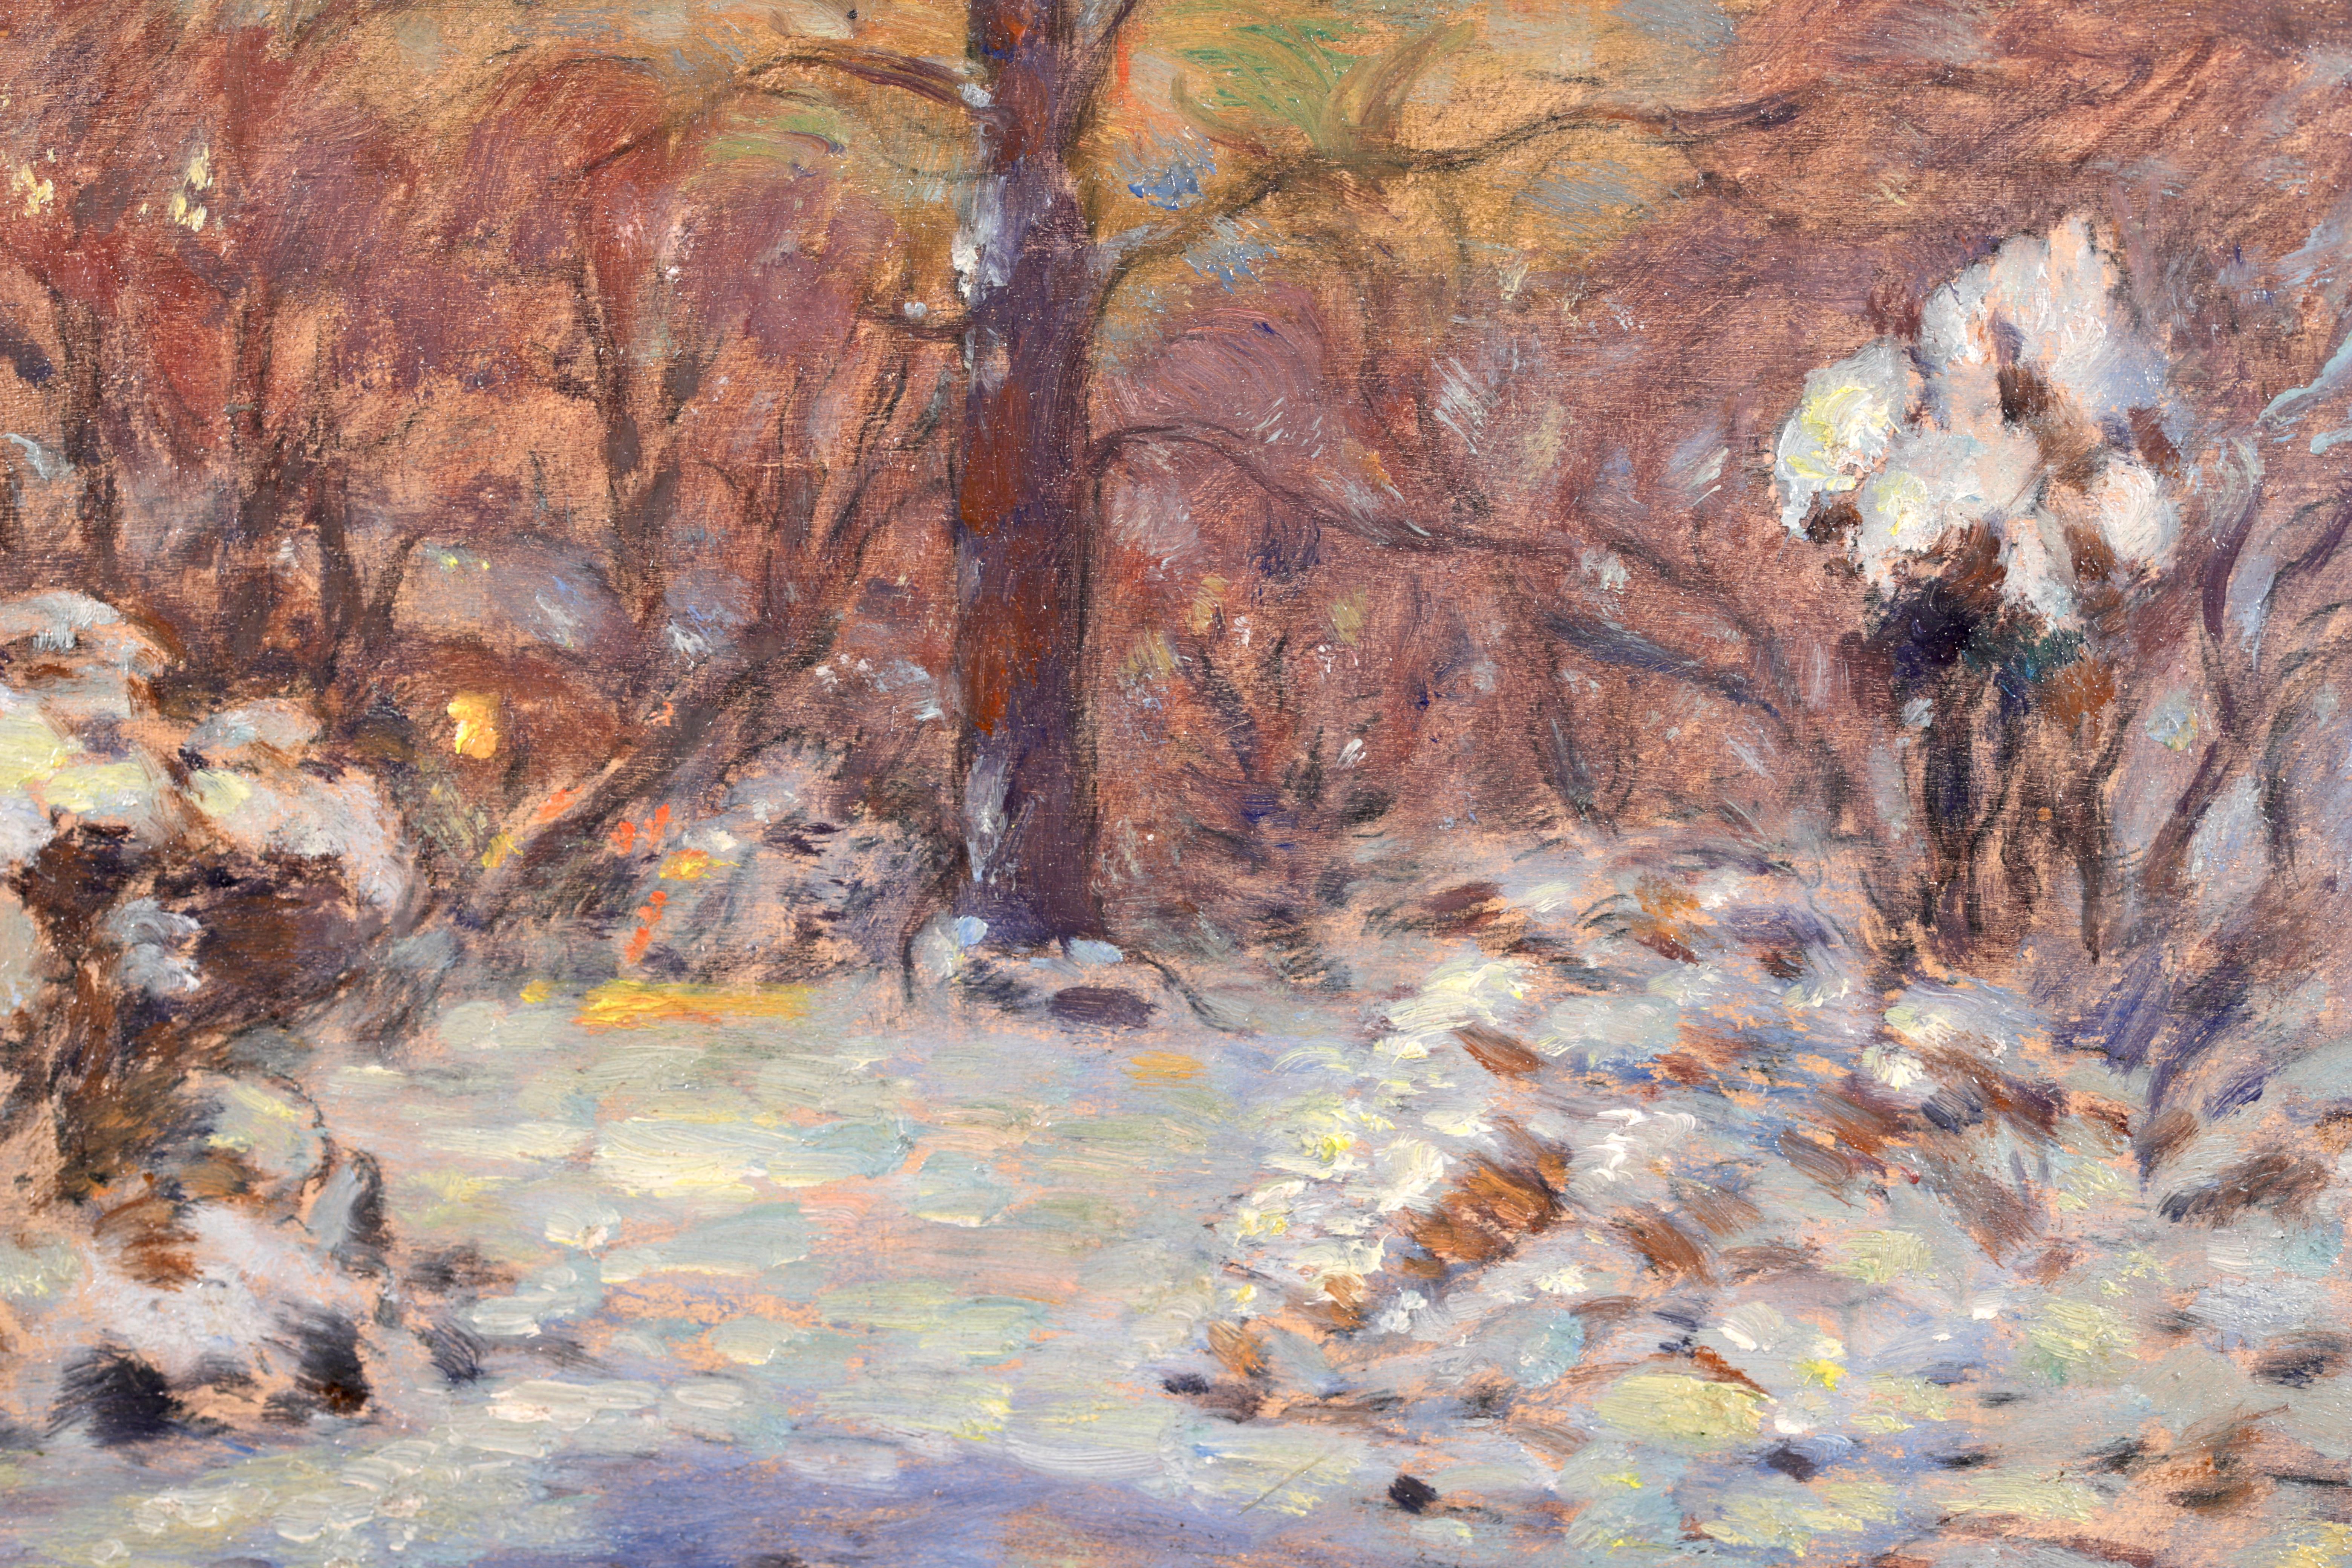 Flowers in Snow - Impressionist Oil, Snowy Winter Landscape by Marie Duhem 4